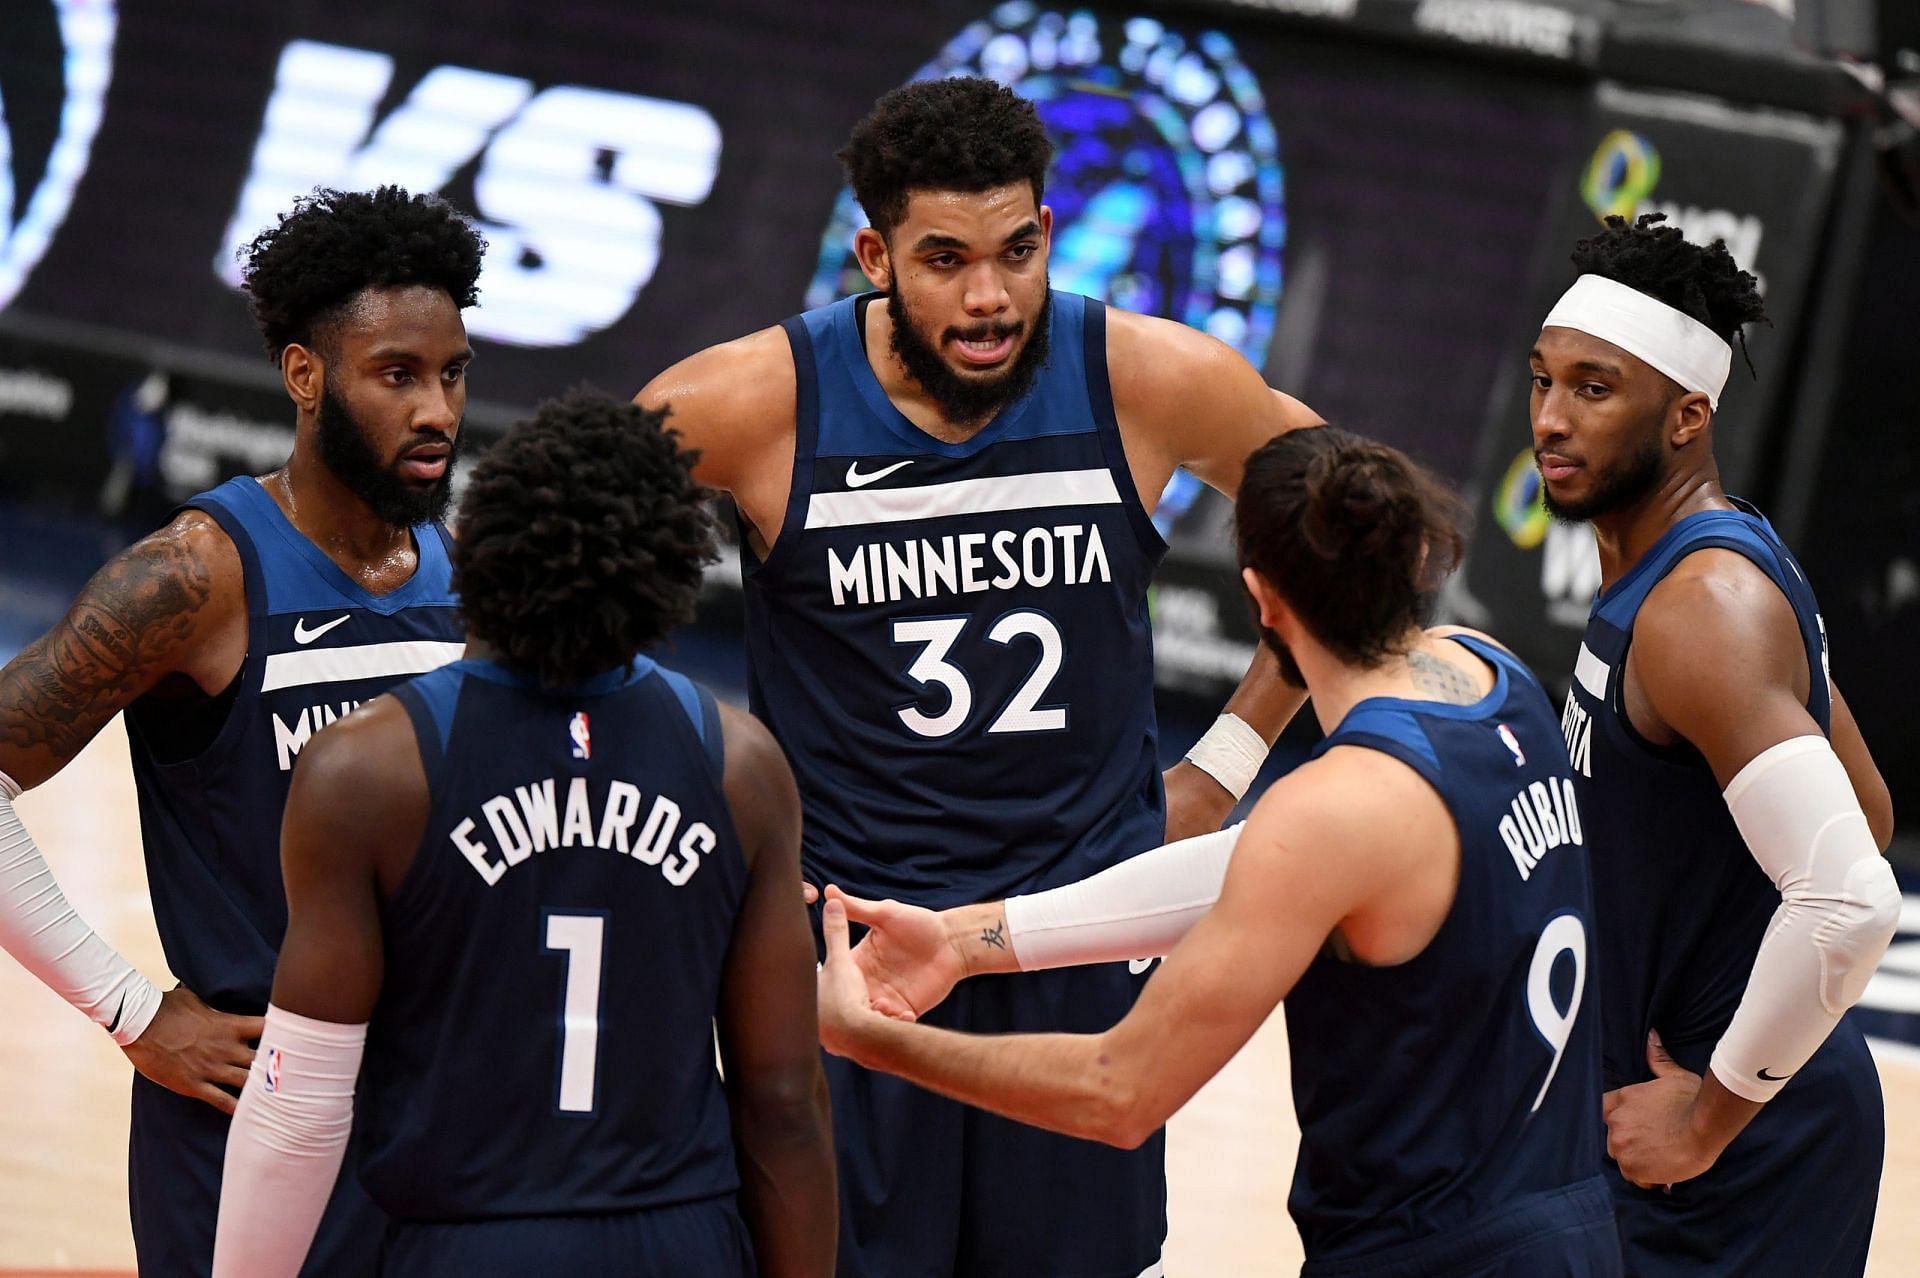 The Minnesota Timberwolves have rediscovered their defensive identity in their current winning streak. [Photo: Dunking with Wolves]